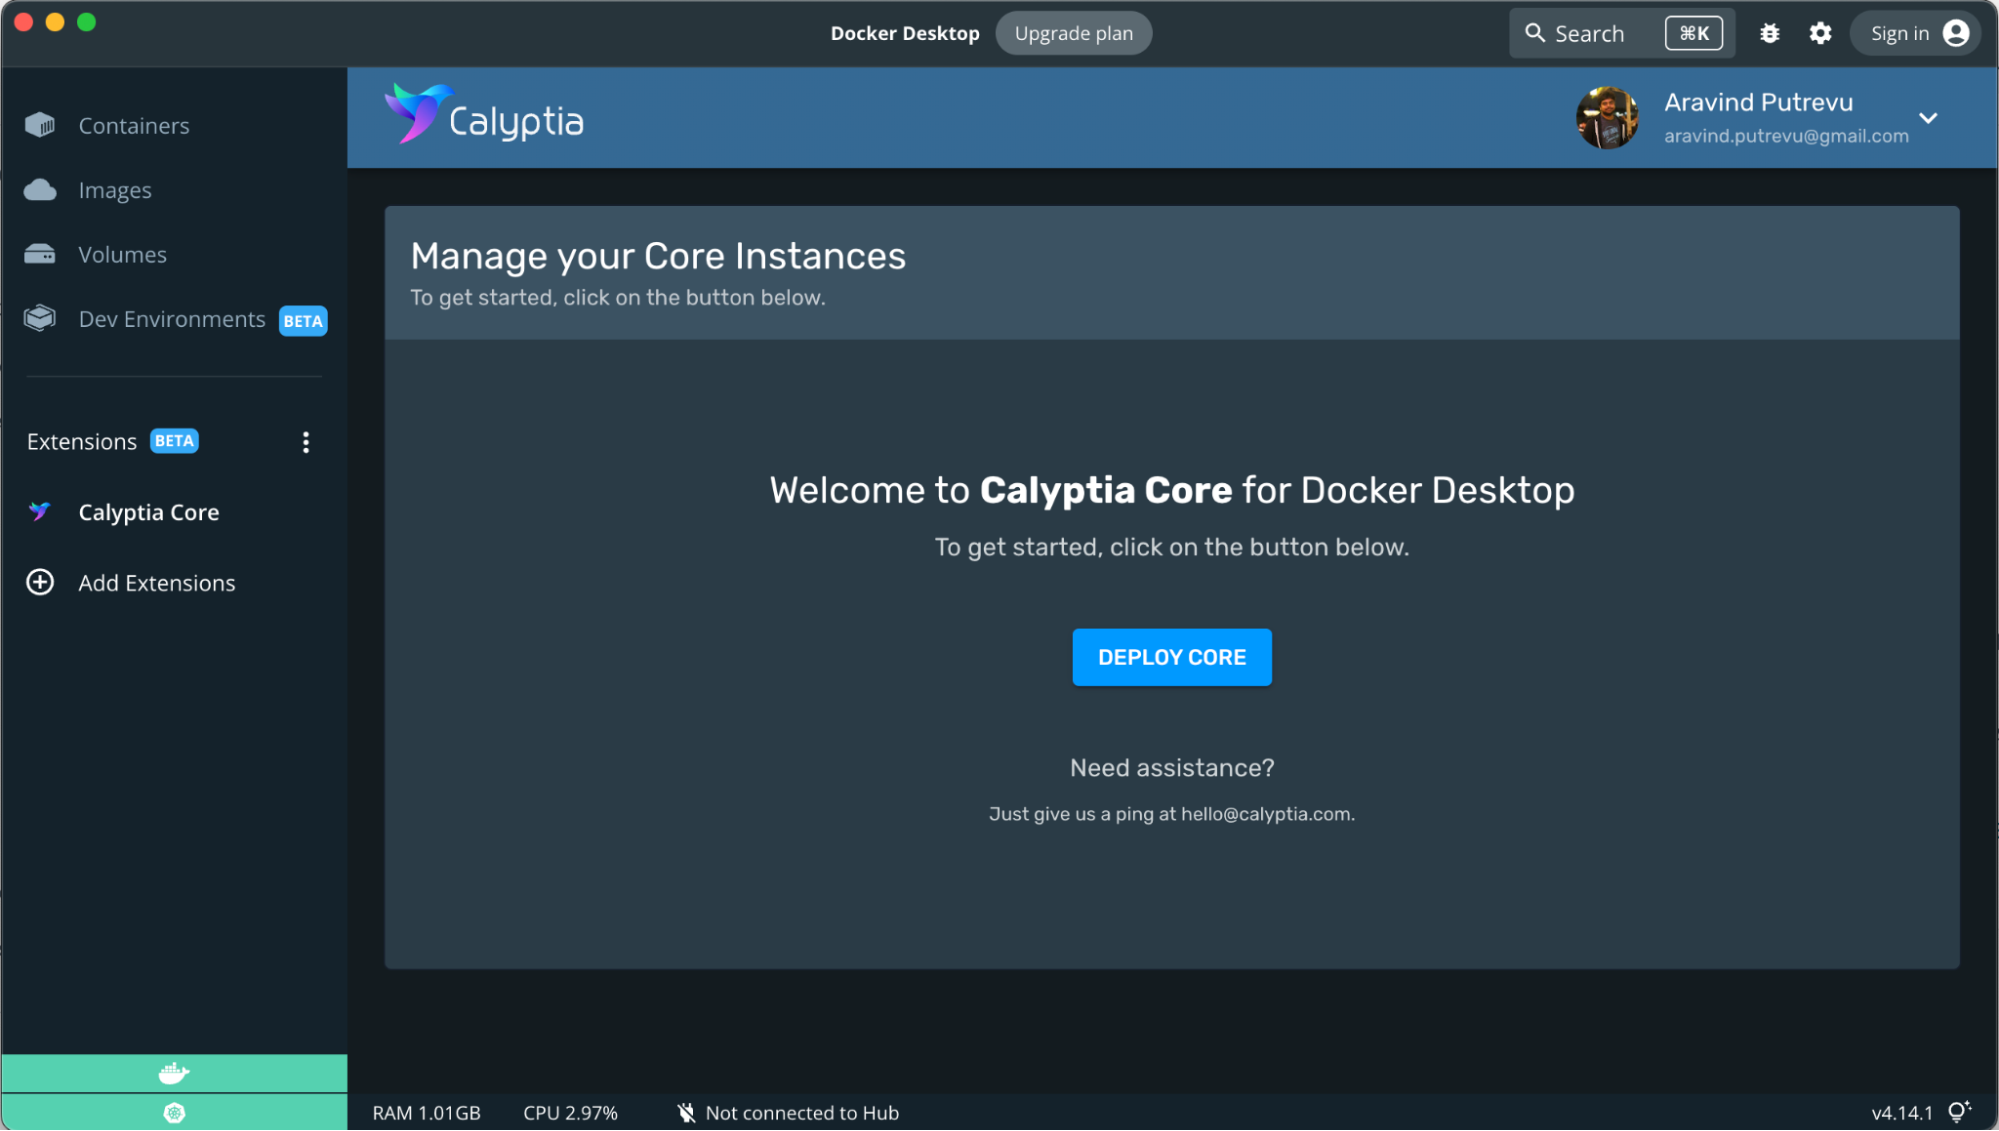 Calyptia core docker extension welcome page.